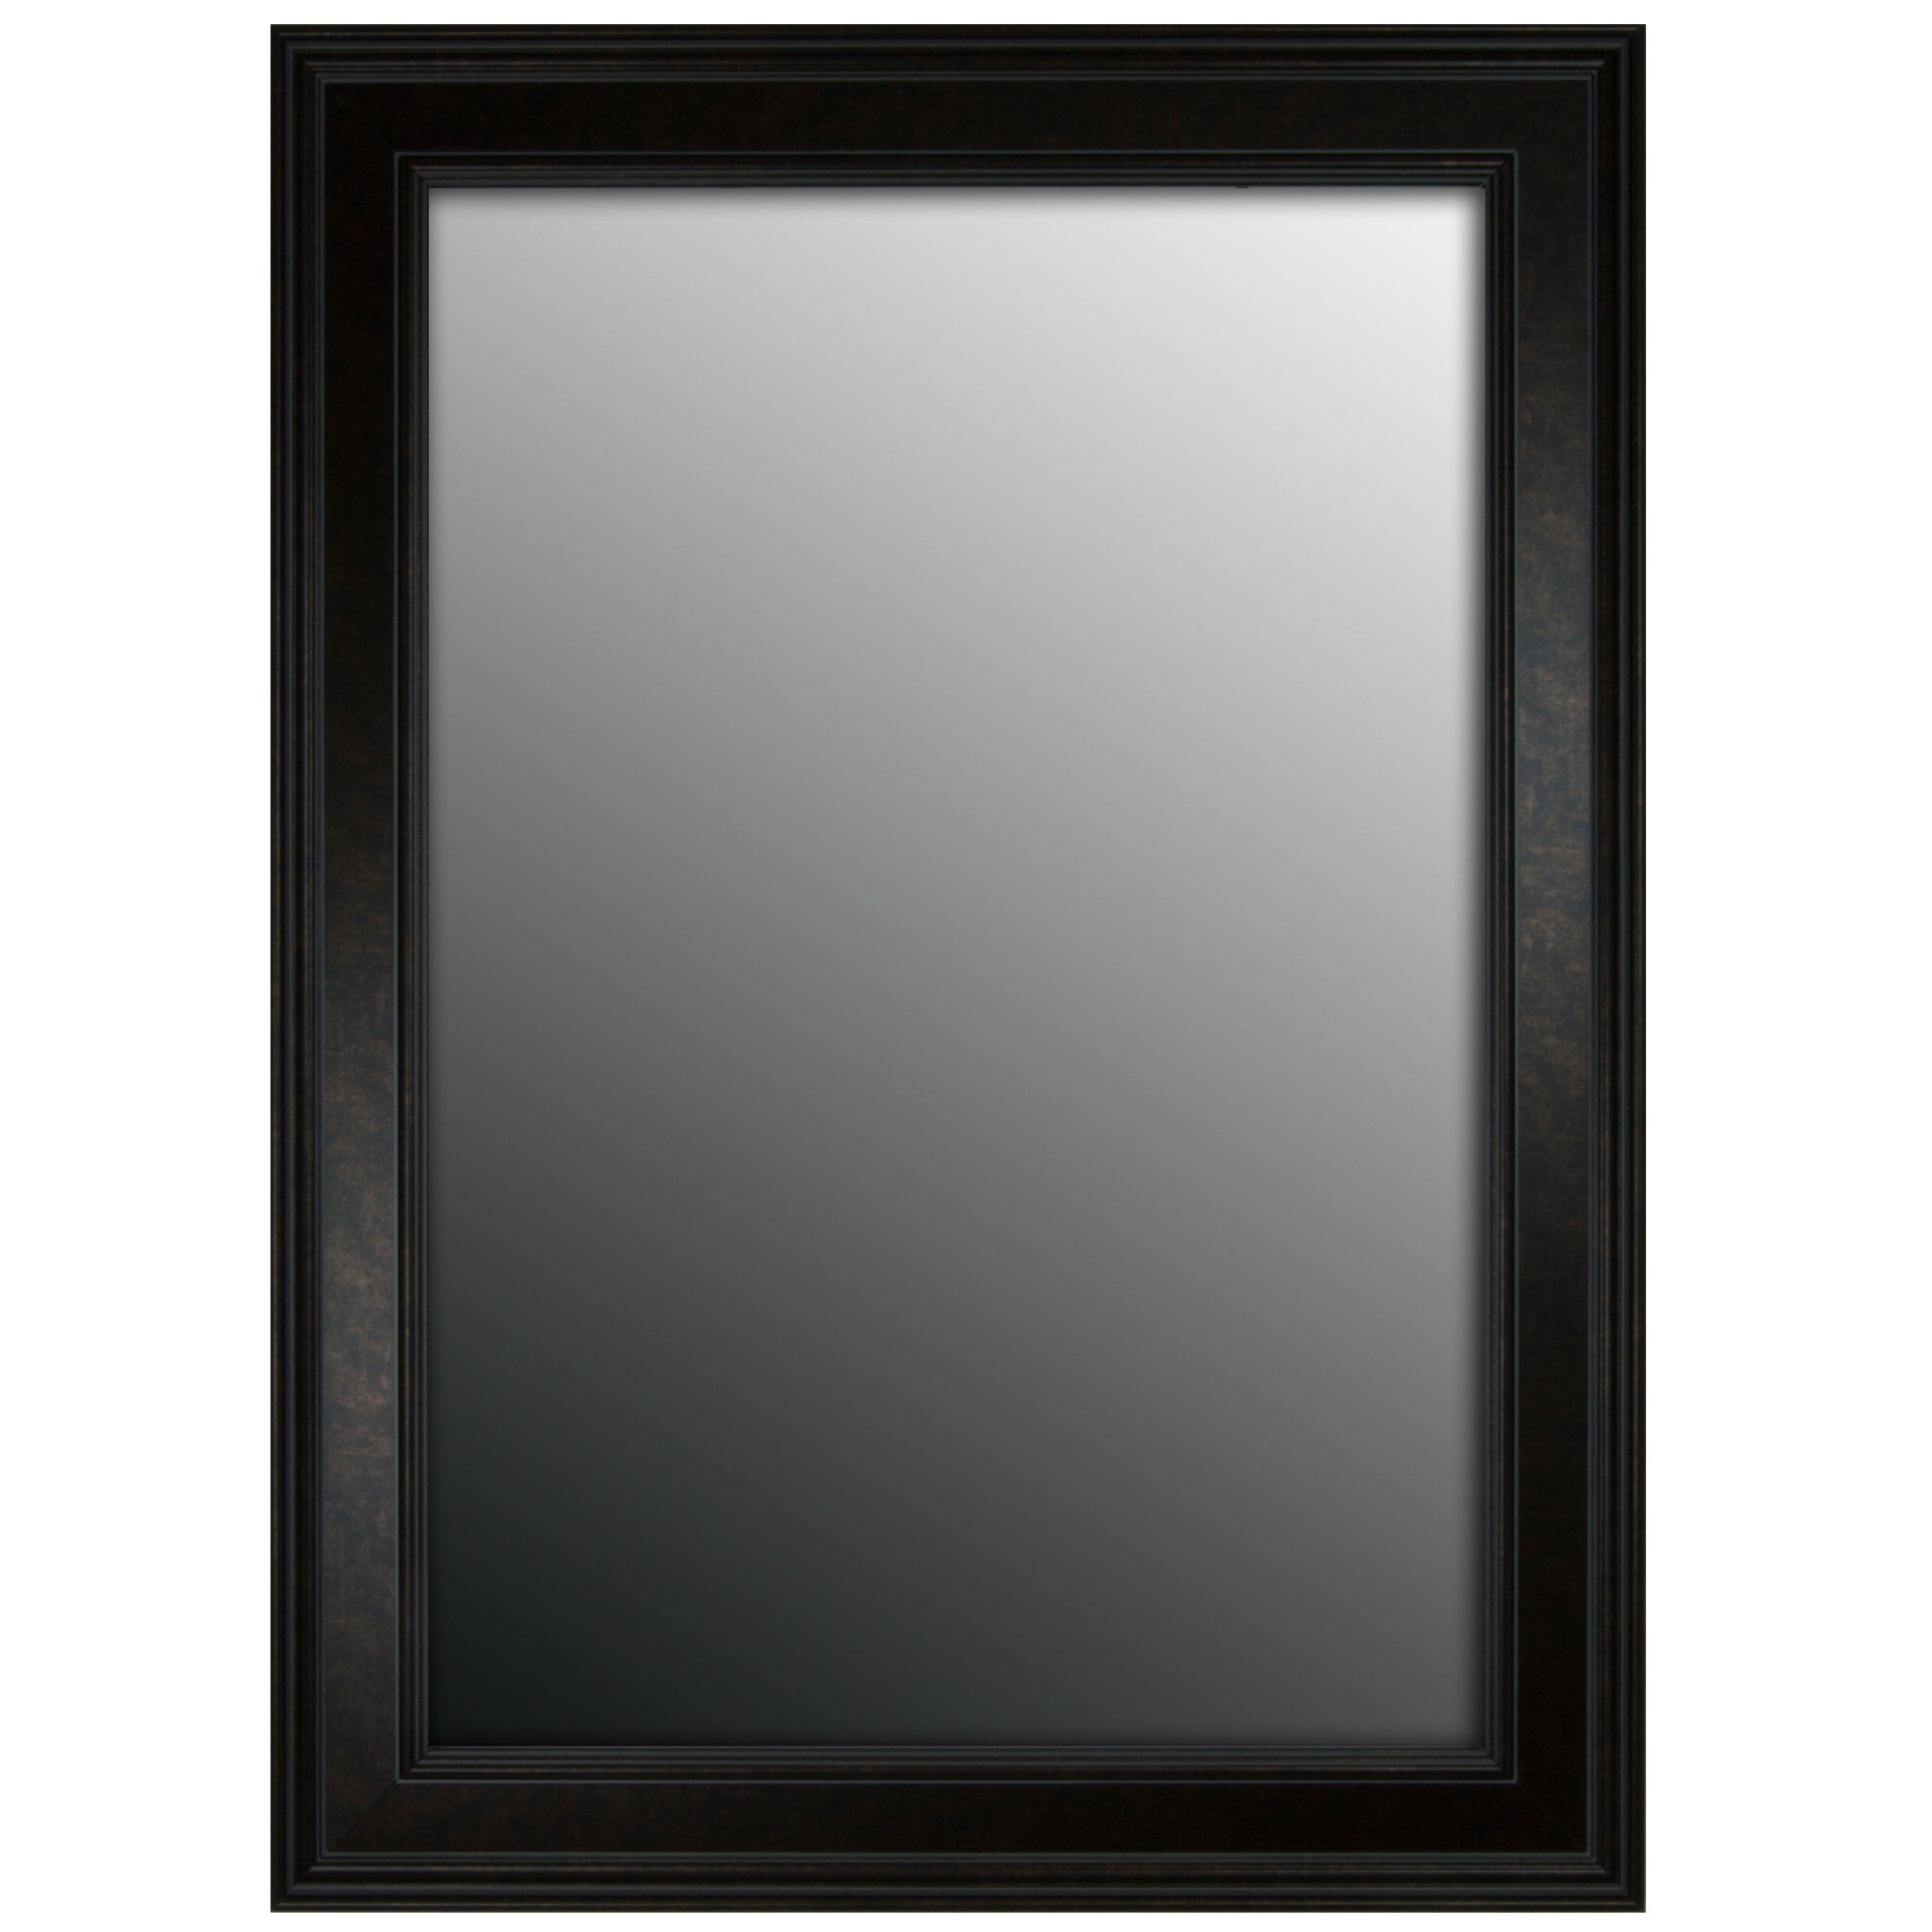 Second Look Mirrors Cappuccino Copper Bronze Wall Mirror Reviews Intended For Bevelled Edge Bathroom Mirror (View 14 of 15)